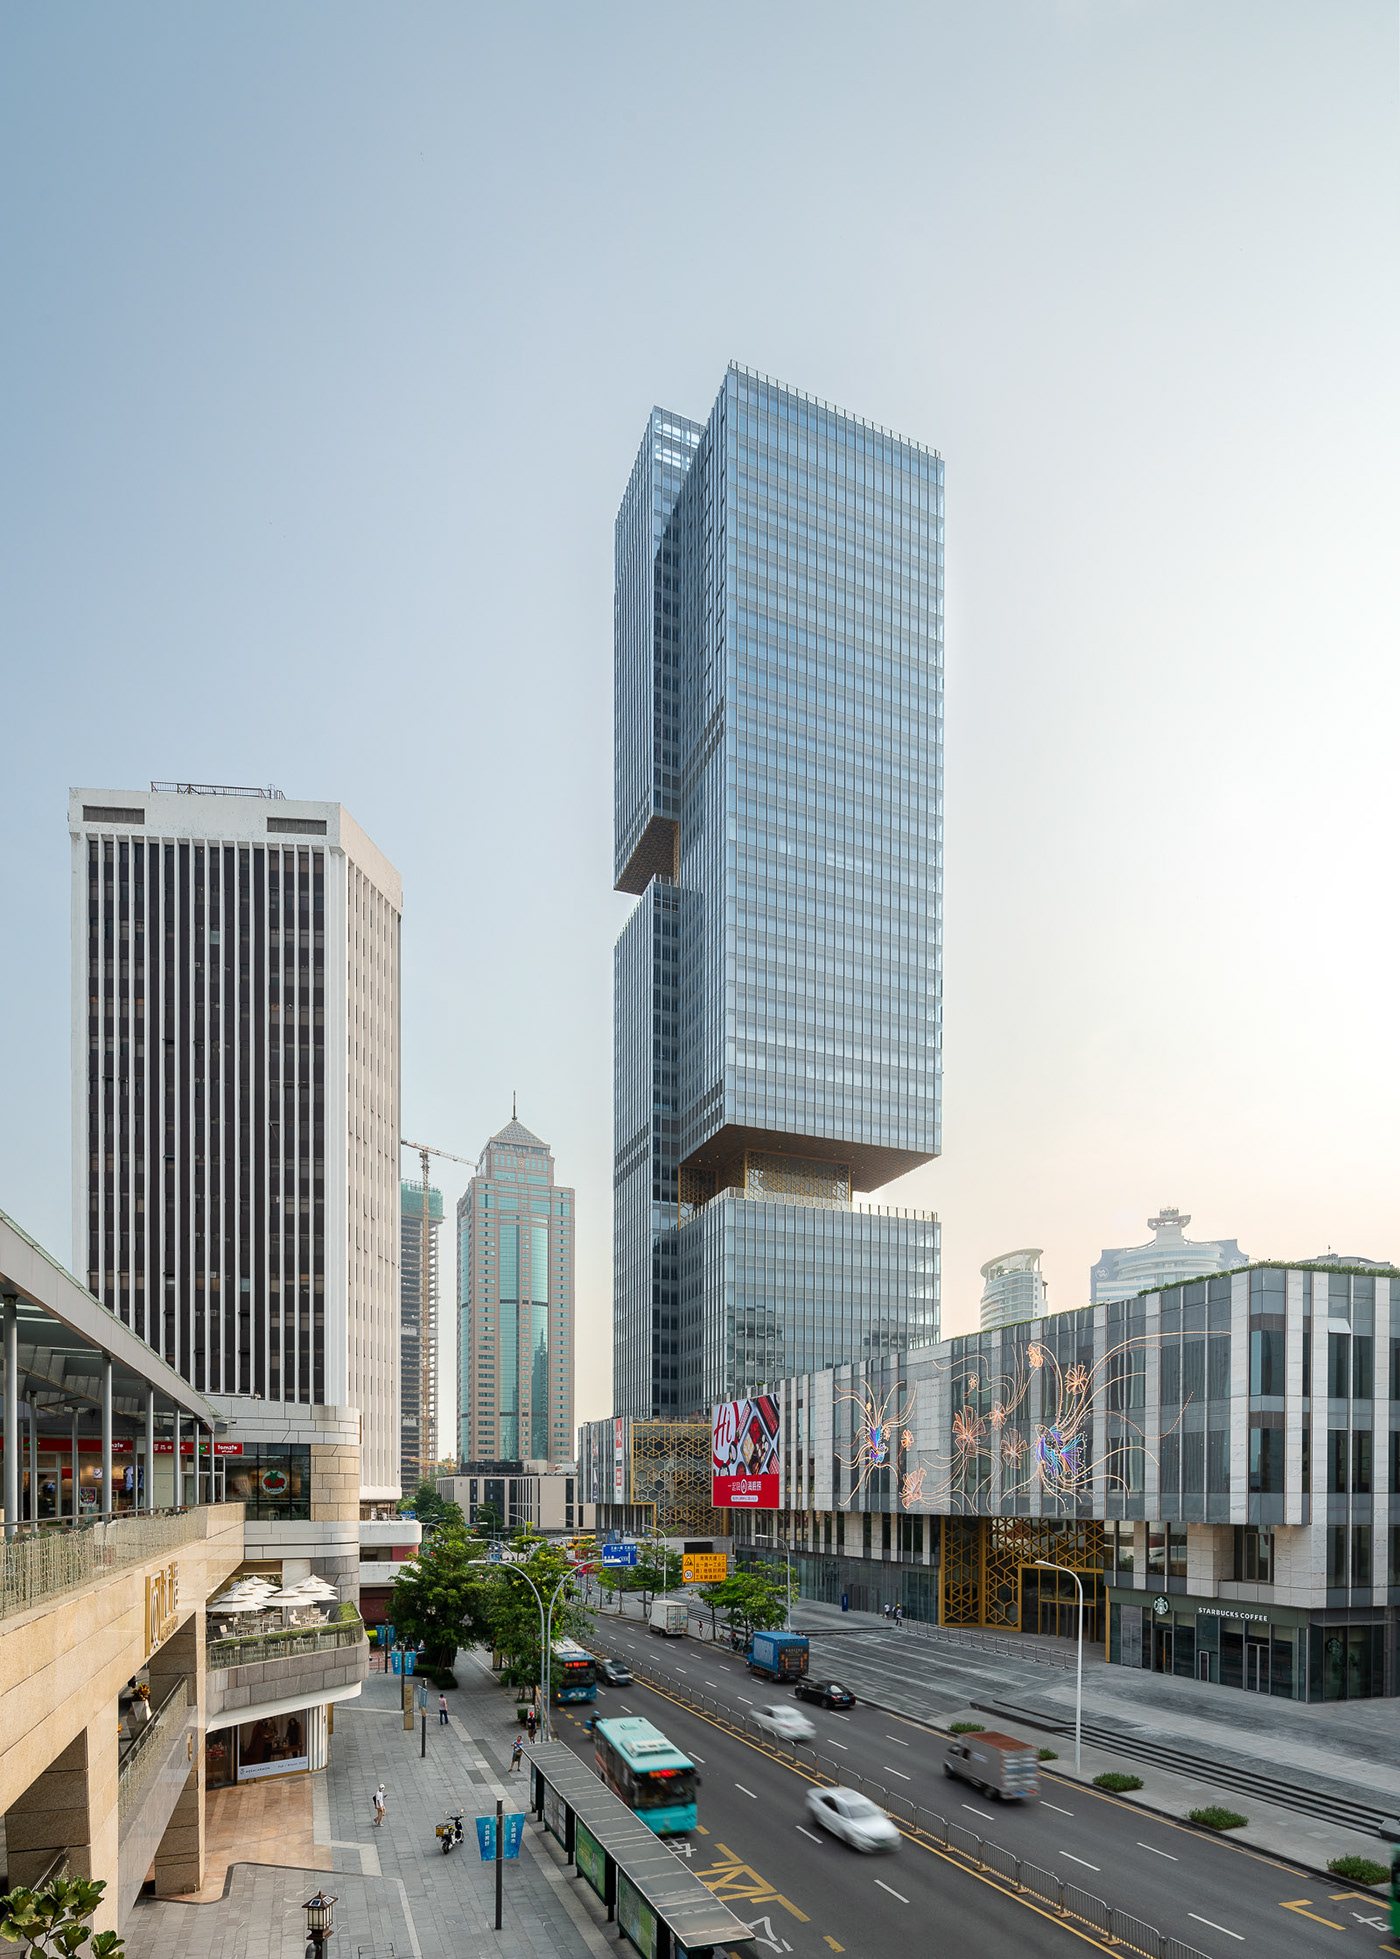 architecture architecture design Architecture Photography china Office Building Shenzhen shopping mall skyscraper Tall Building tower